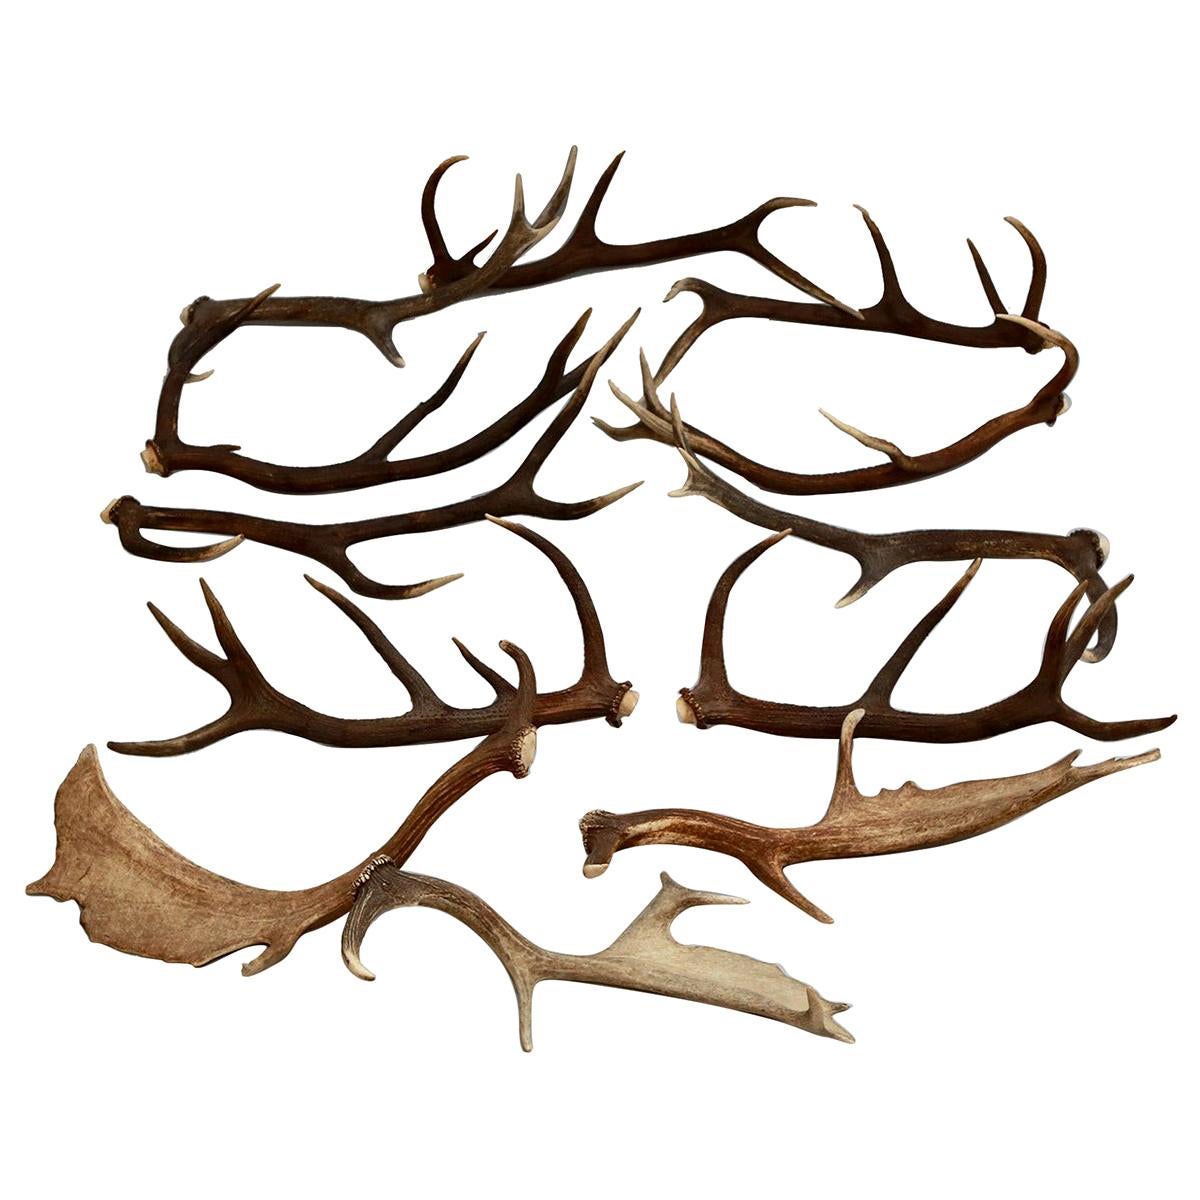 European Collection of Elk and Moose Antlers For Sale